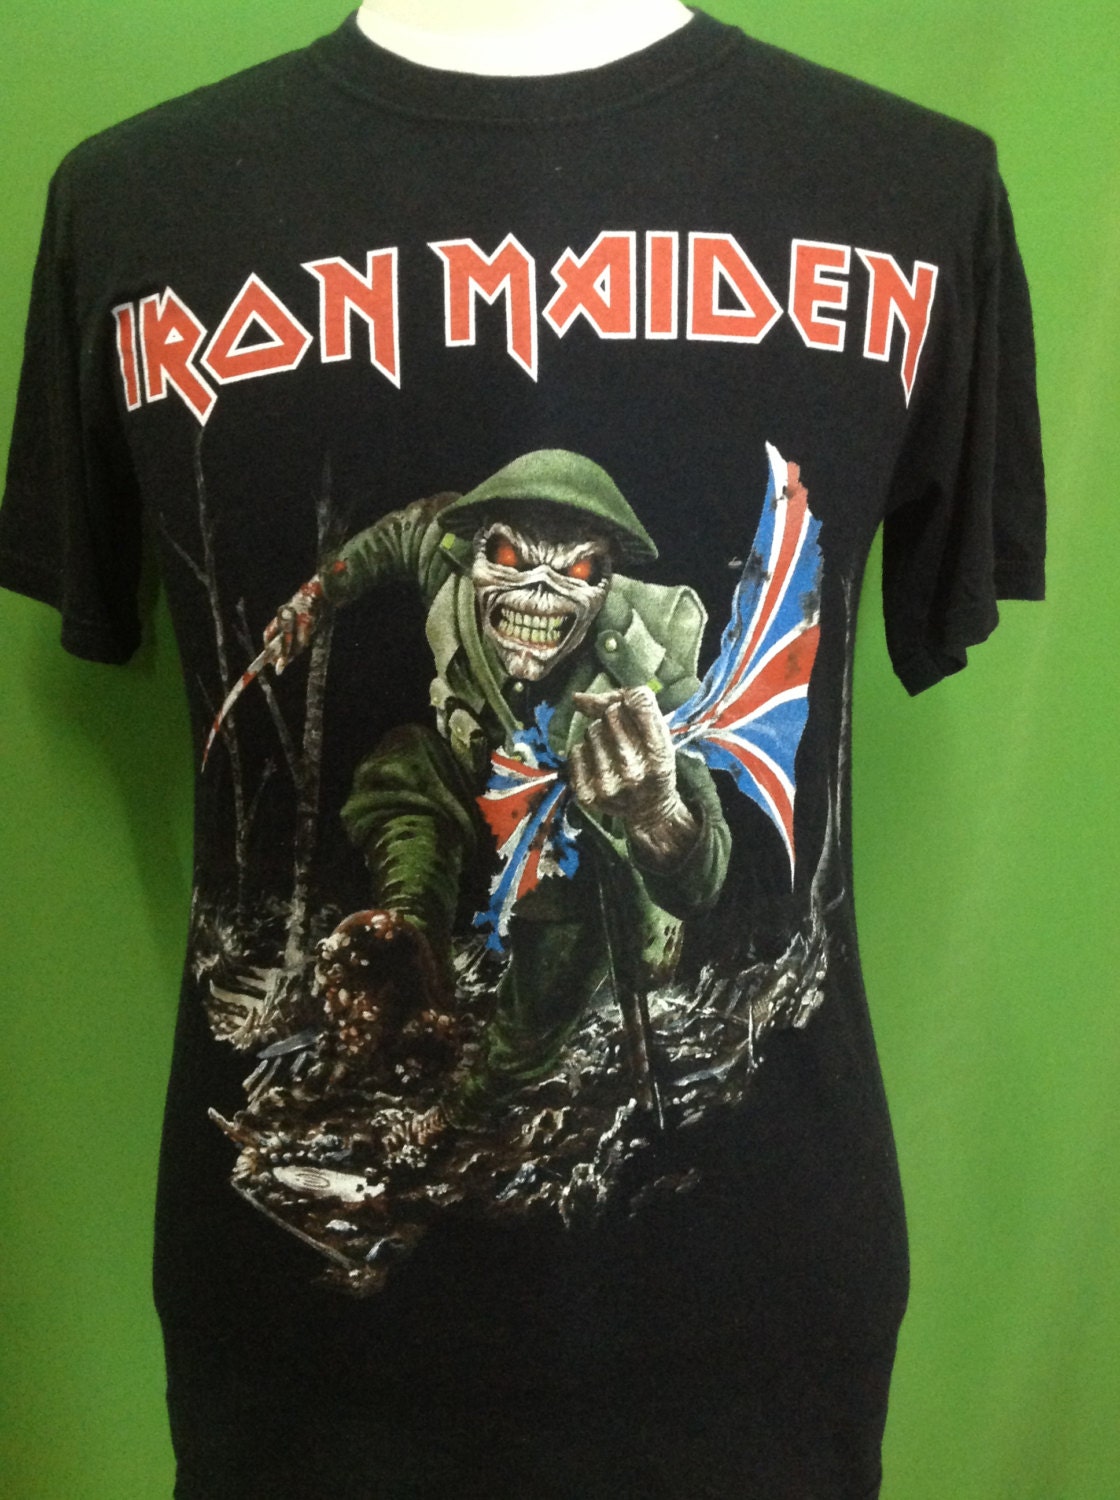 Iron Maiden These Colours Don't Run full print great